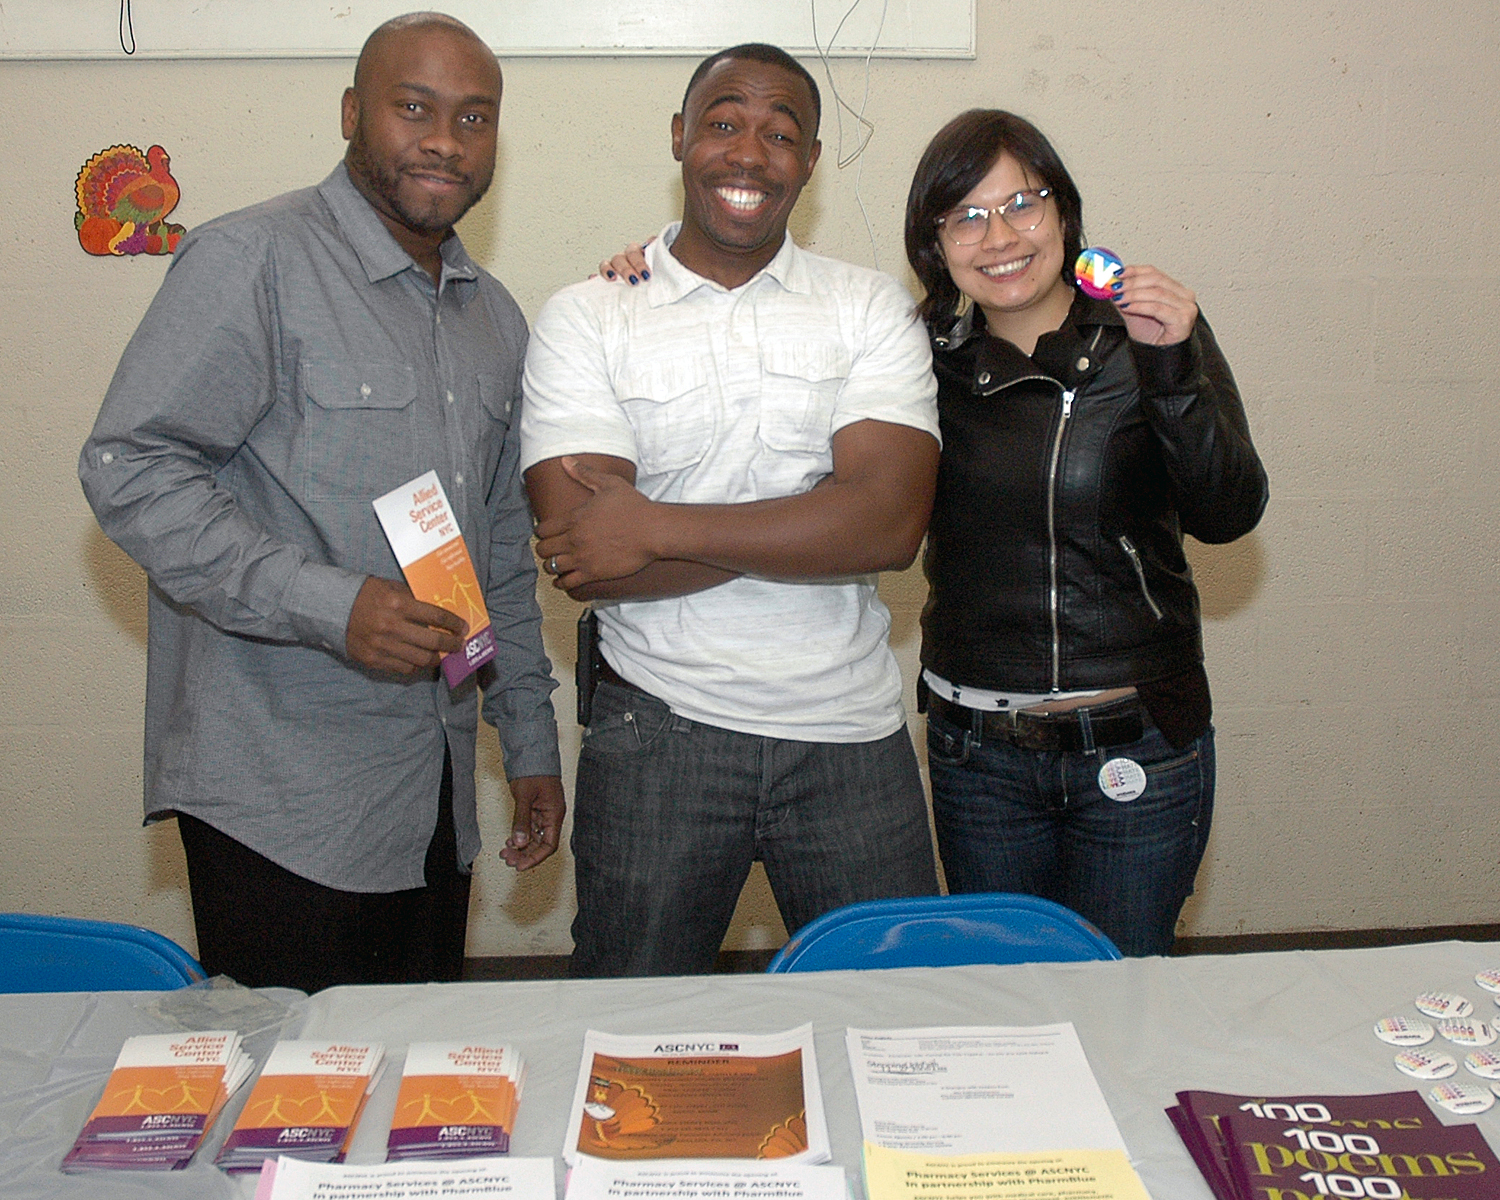 ASCNYC Staff Members at the Outreach table